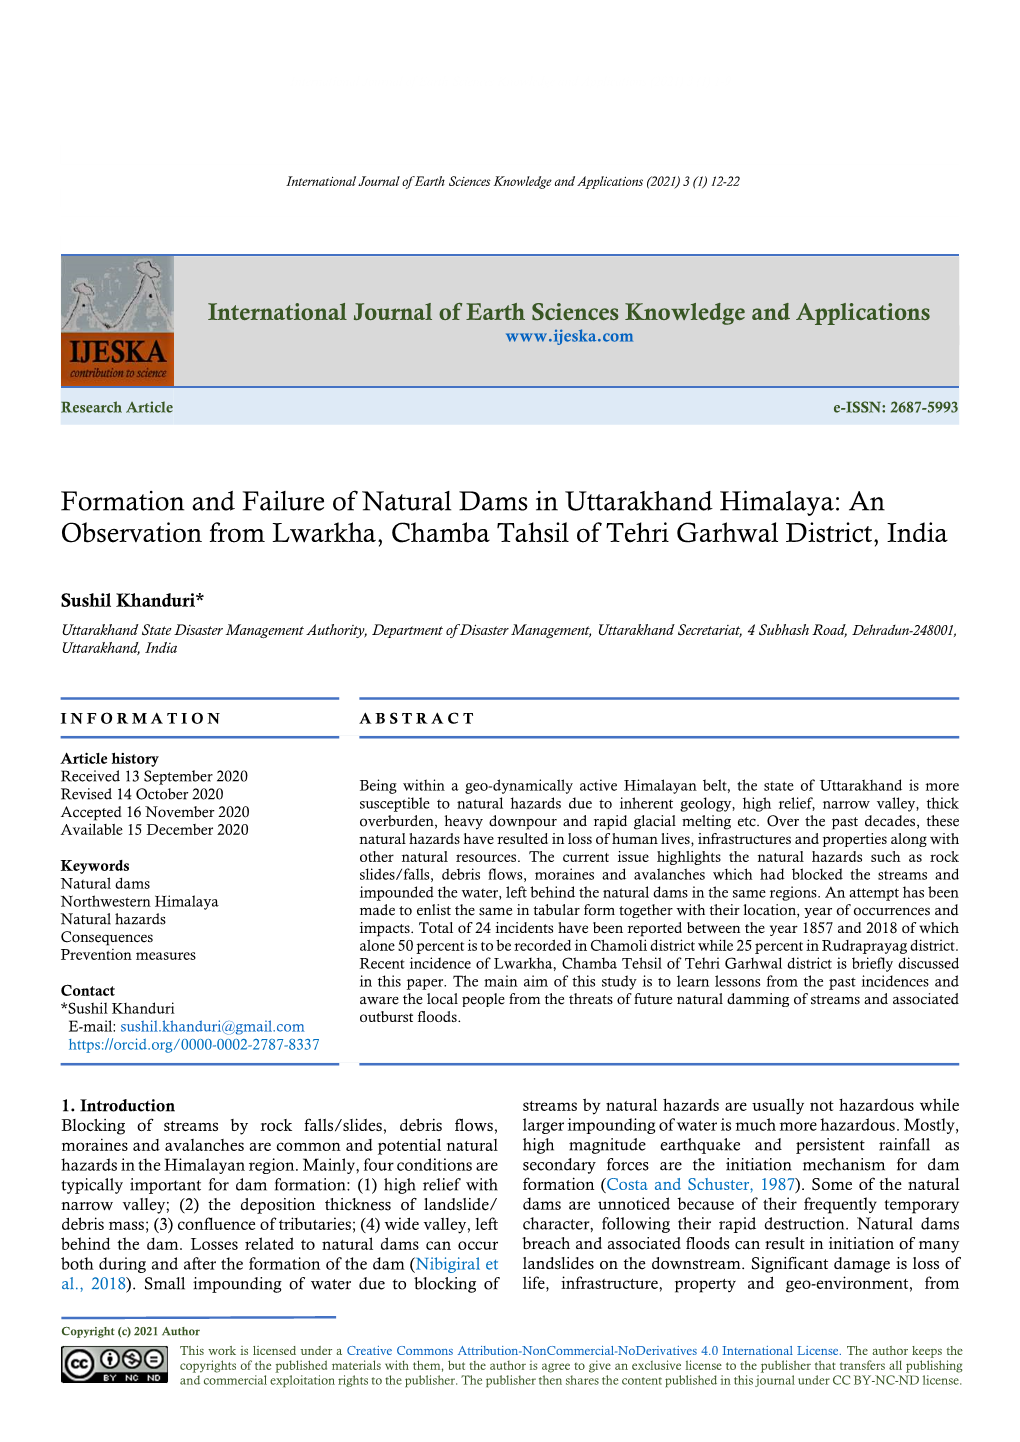 Formation and Failure of Natural Dams in Uttarakhand Himalaya: an Observation from Lwarkha, Chamba Tahsil of Tehri Garhwal District, India